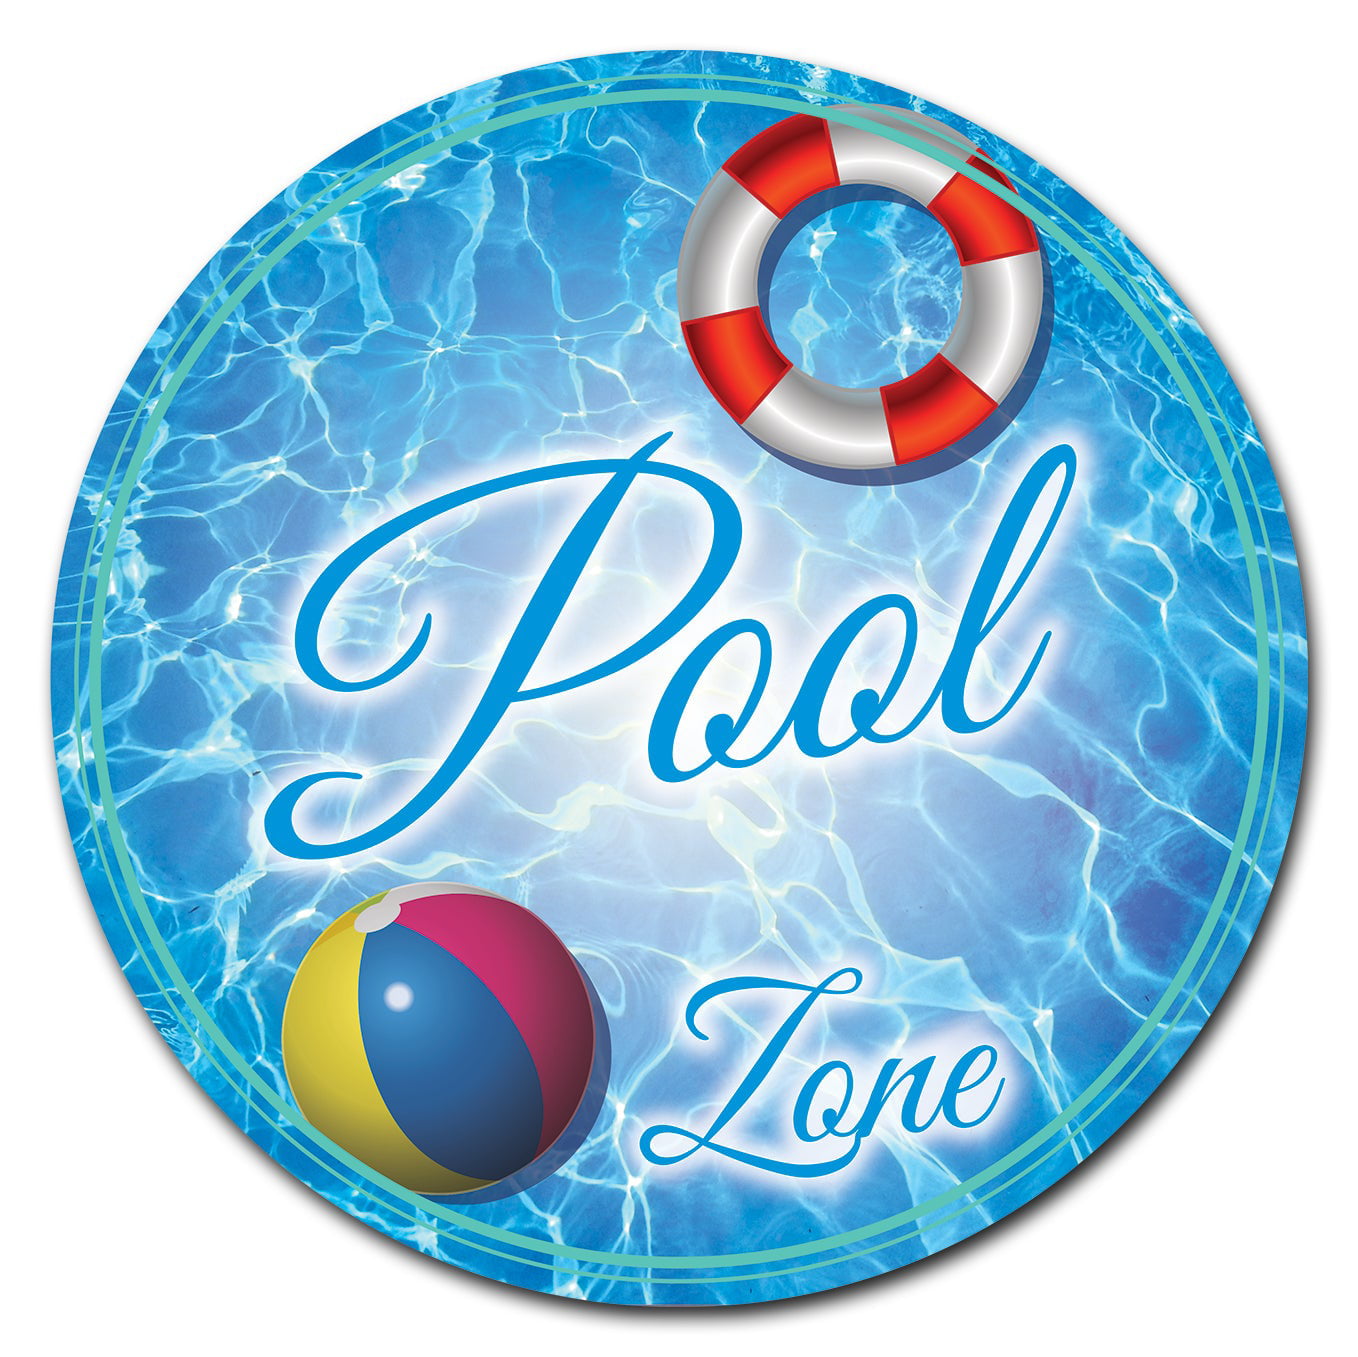 Details about   SignMission Pool Zone Circle  Corrugated Plastic Sign 